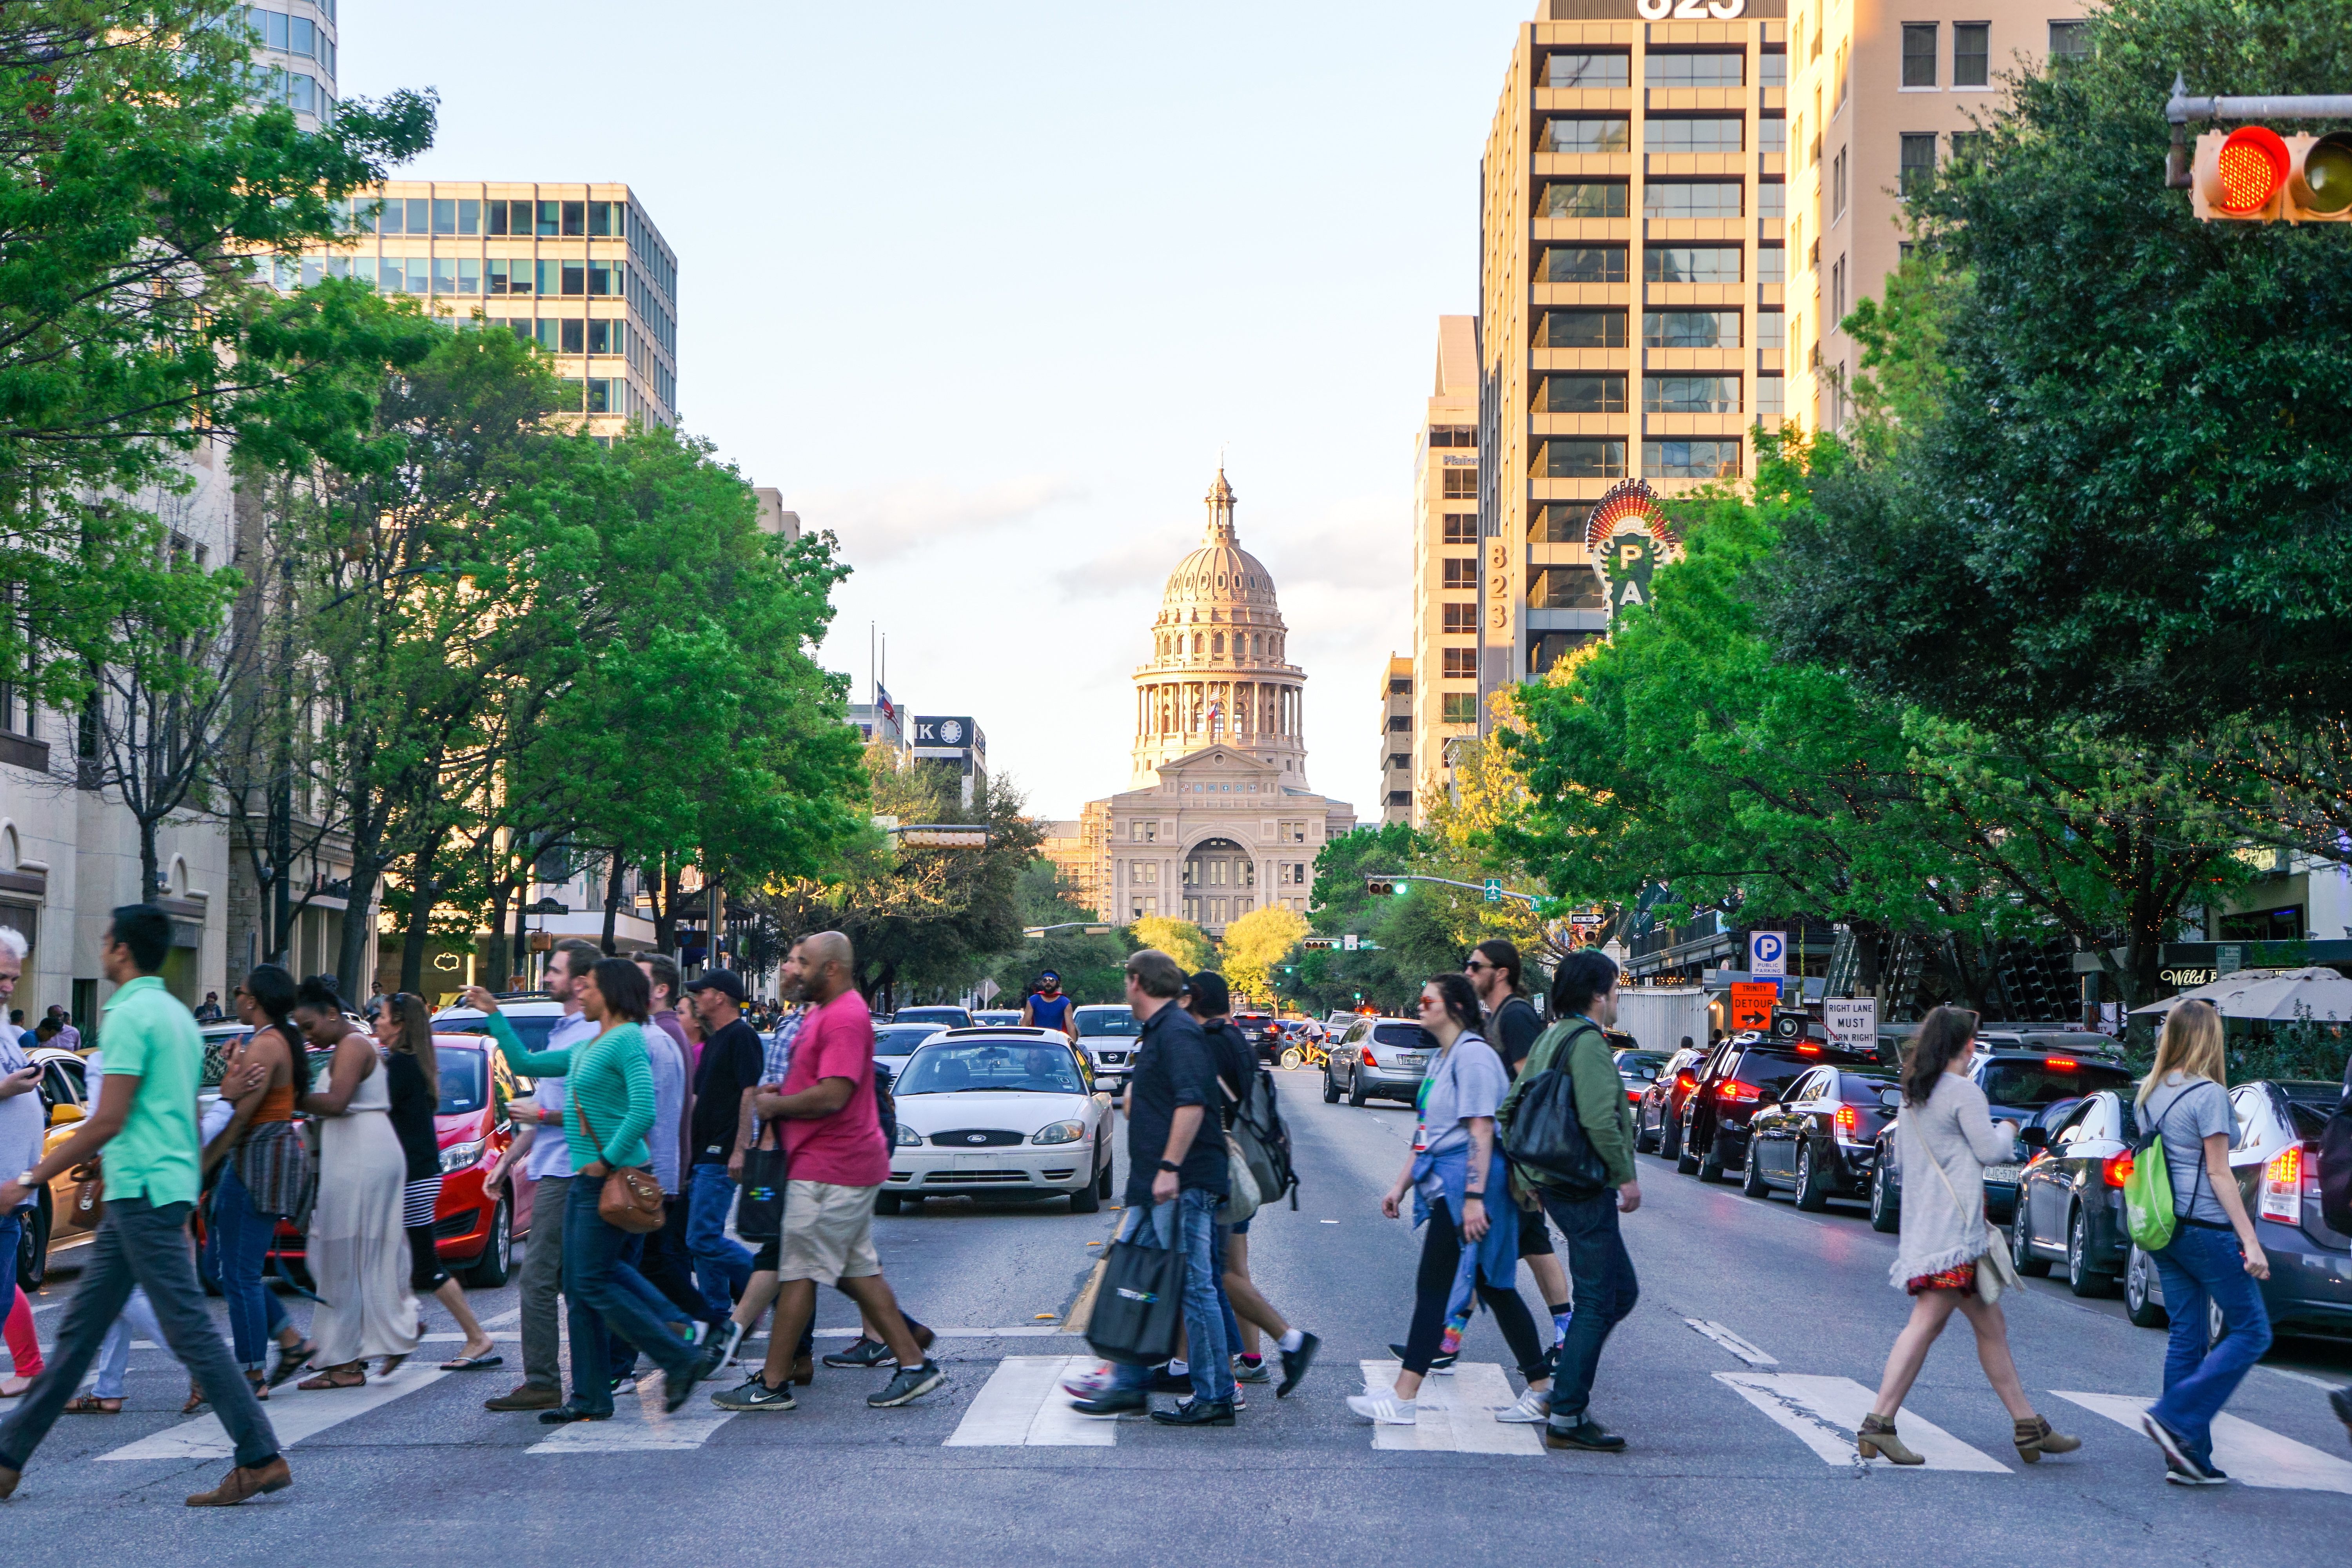 6 Things To Do In Austin, Texas